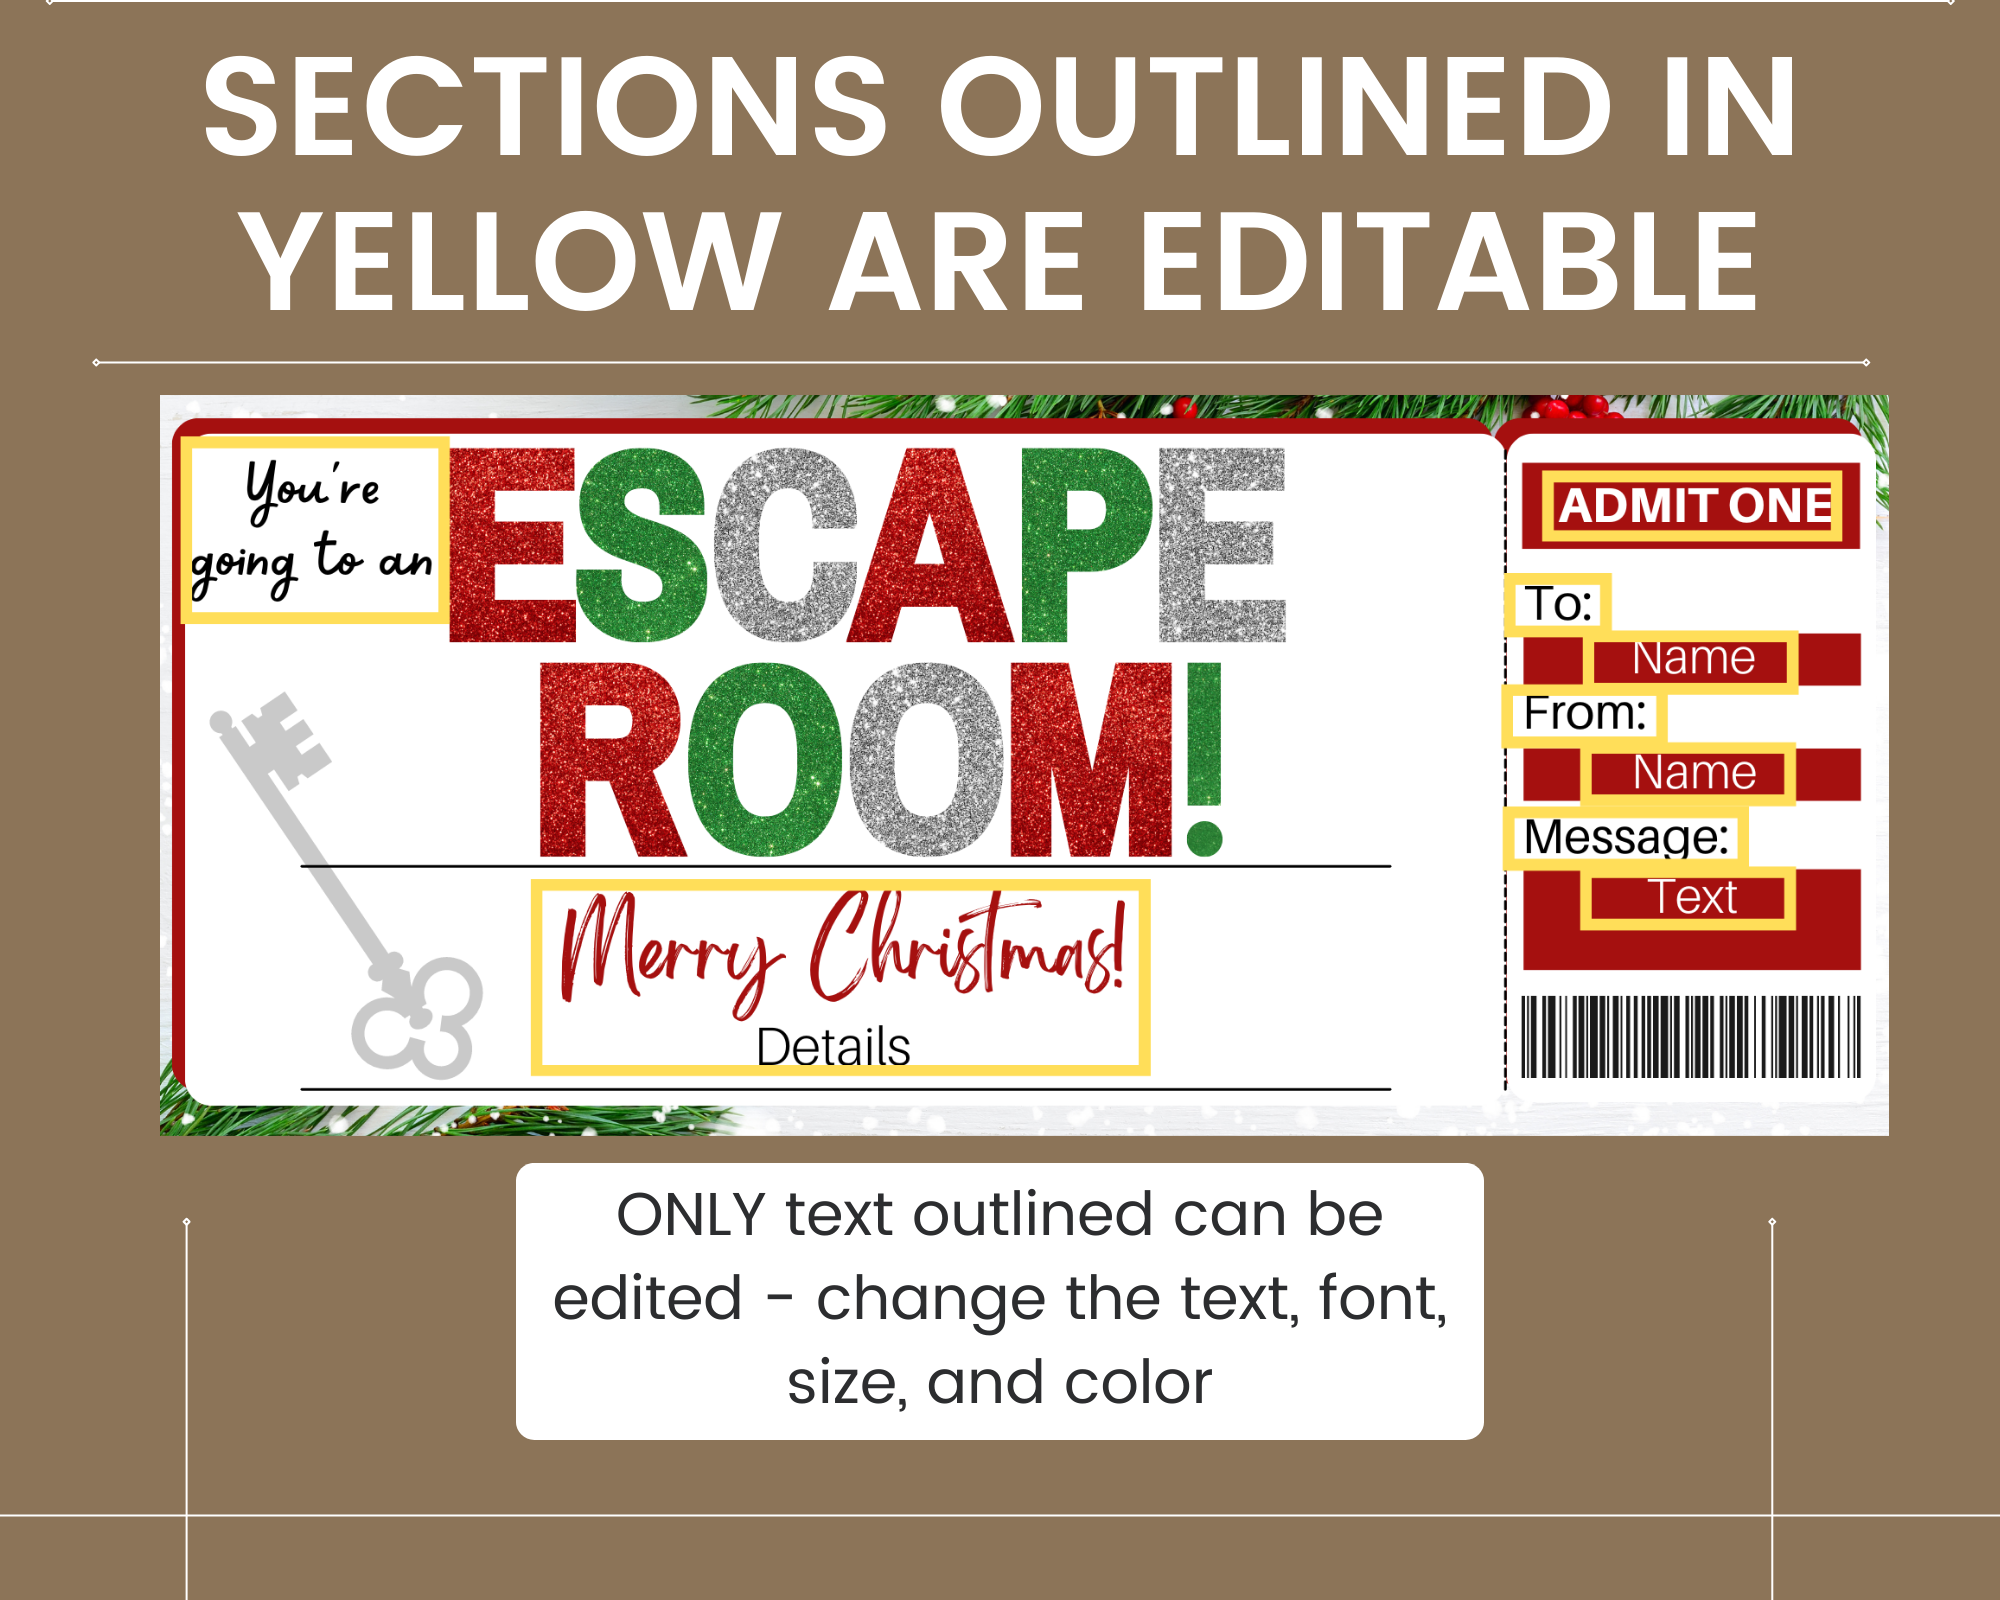 🗝 Escape Room as a gift - voucher for Open The Door